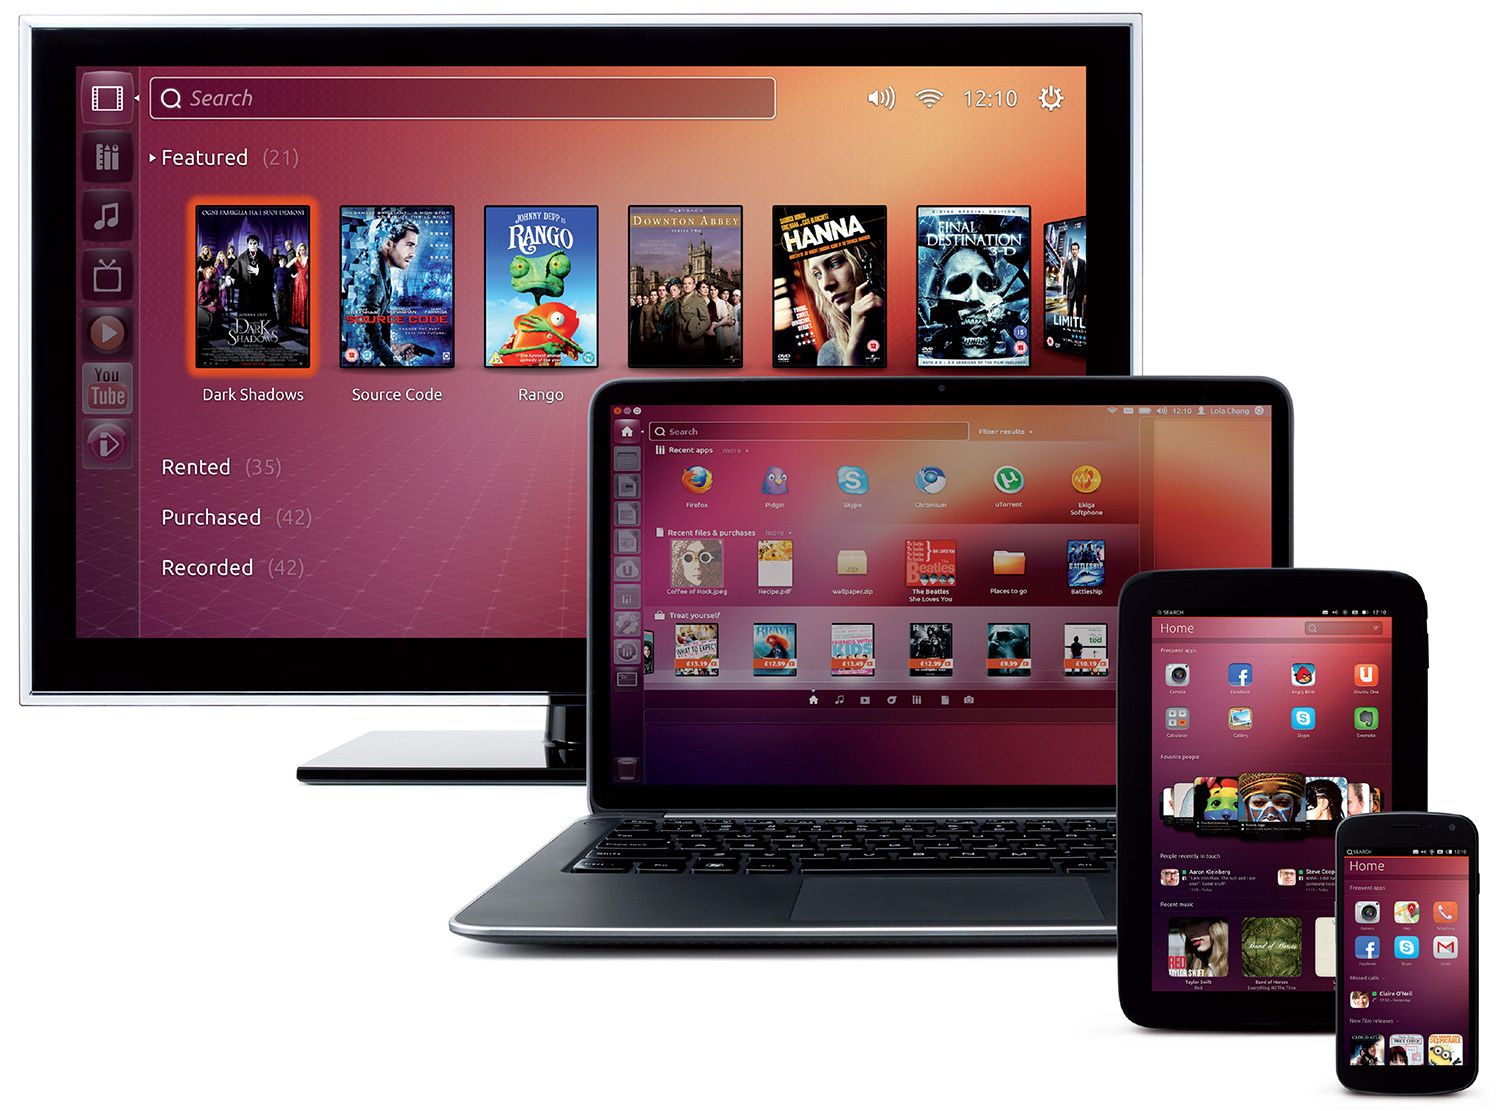 Ubuntu 13 10 saucy salamander devices Five resolutions to help you take full advantage of your PC in 2014